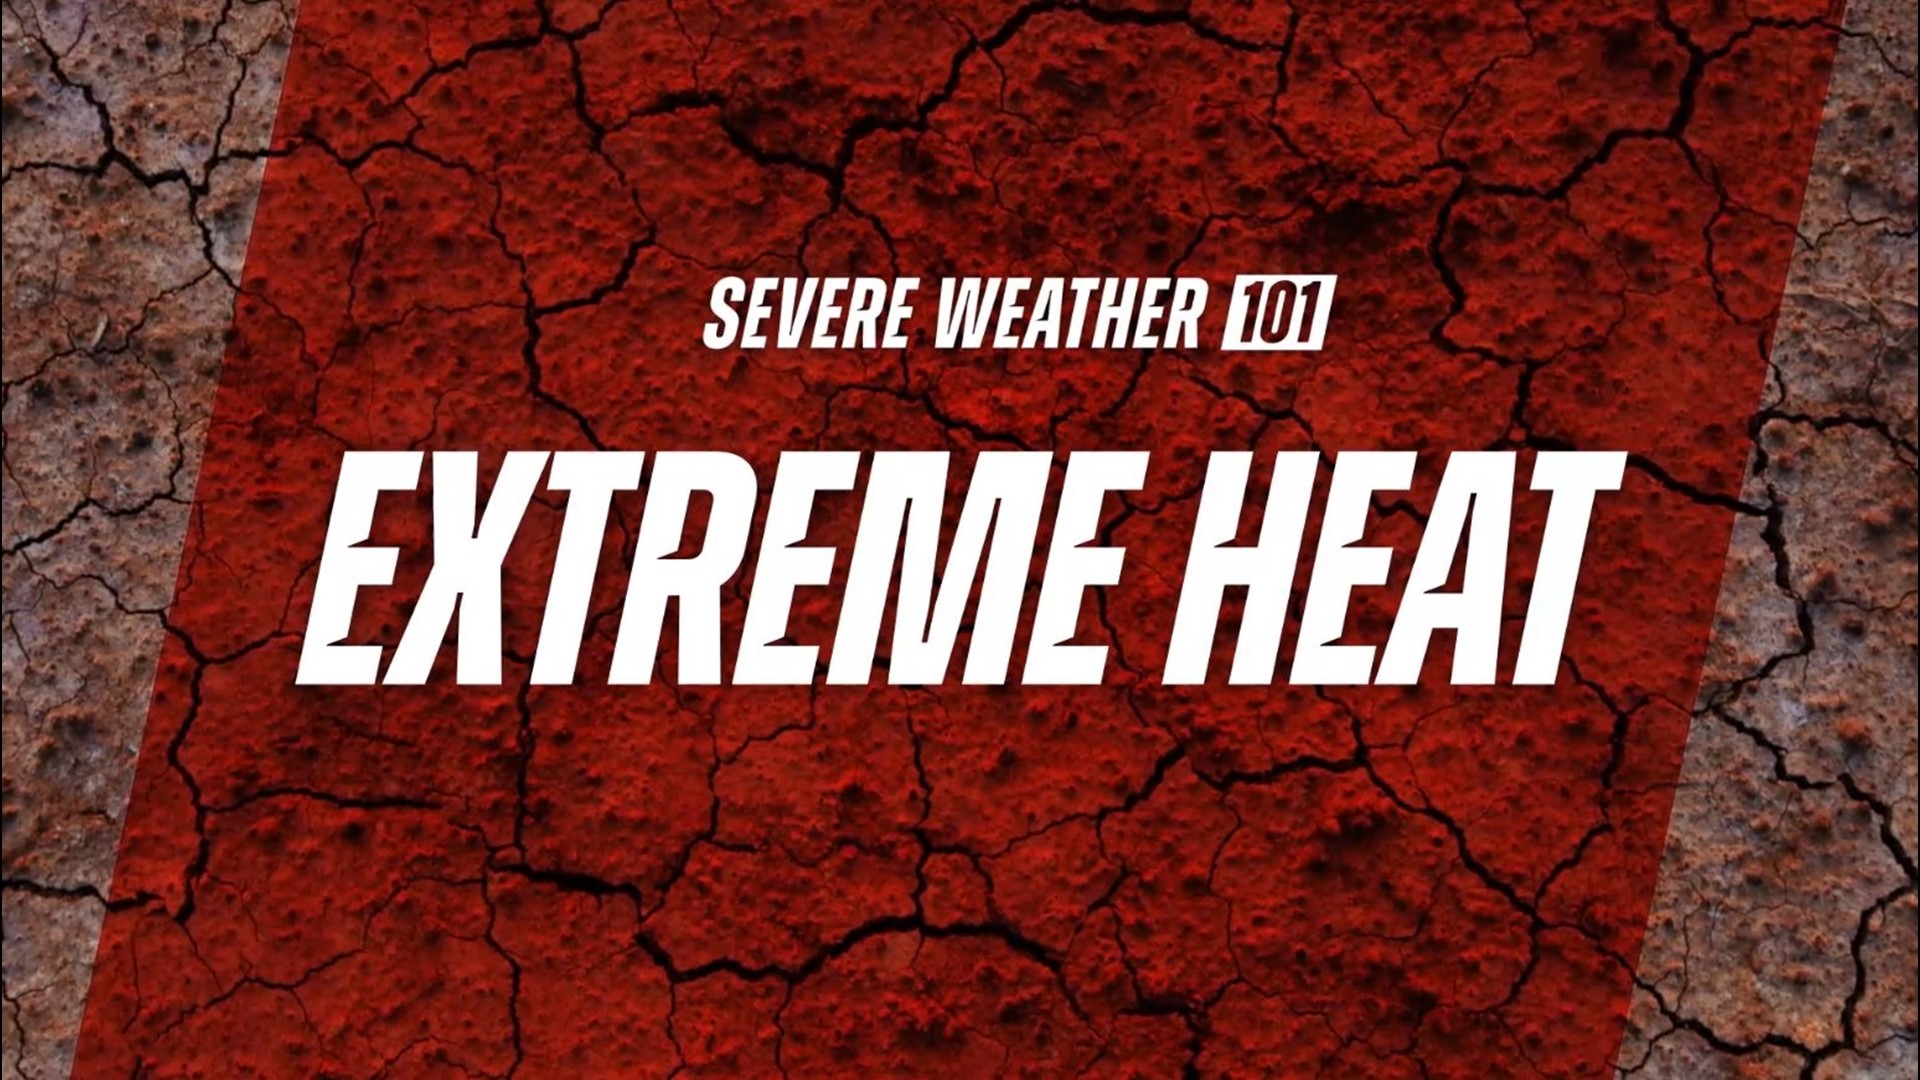 Looking into the causes of extreme heat and its impact on people and cities across the U.S. Plus, the difference between climate change and heat.